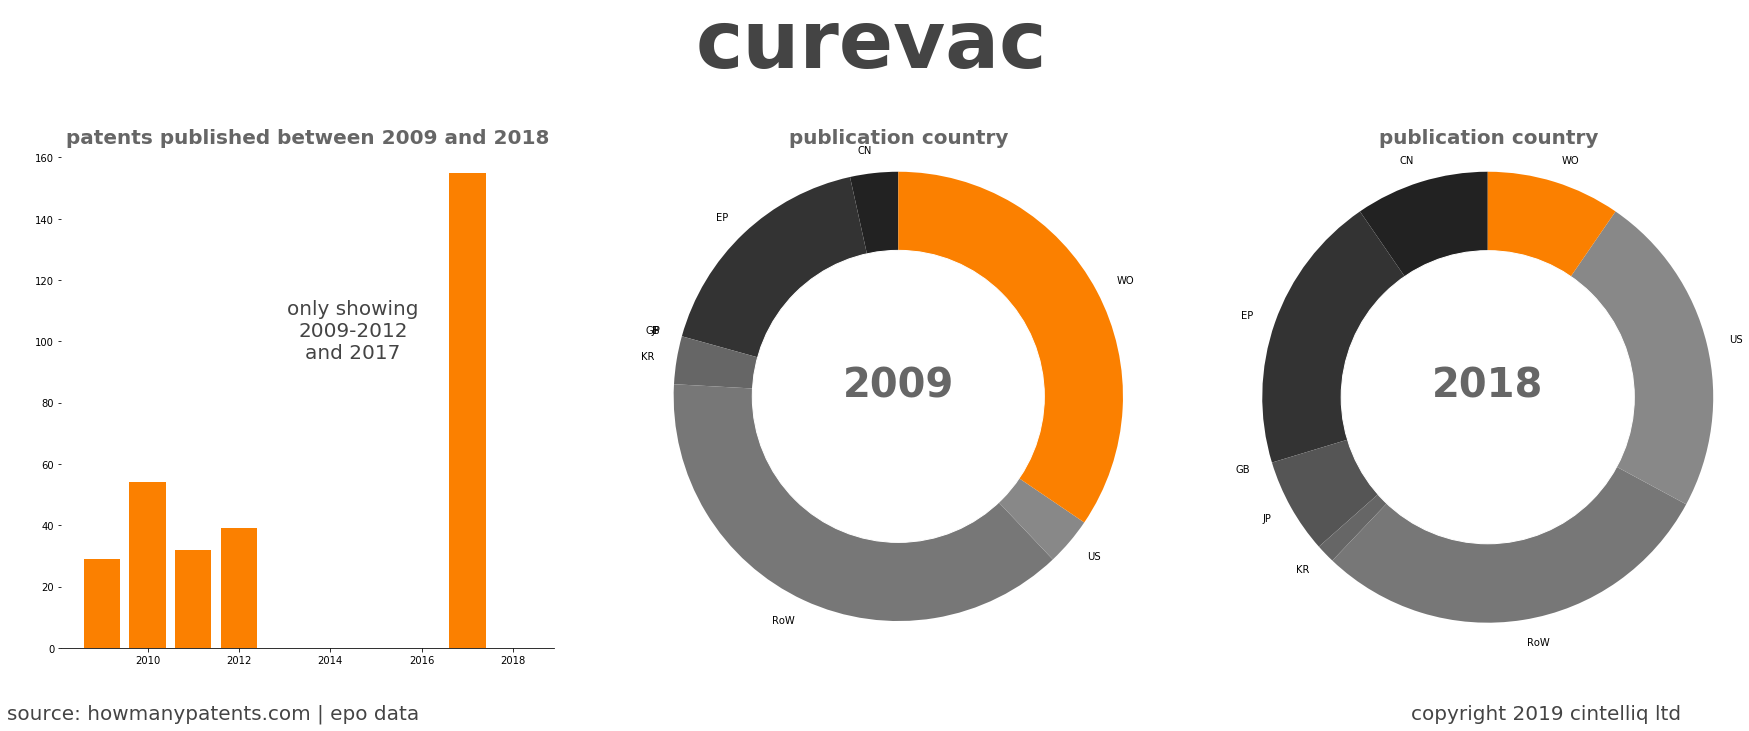 summary of patents for Curevac